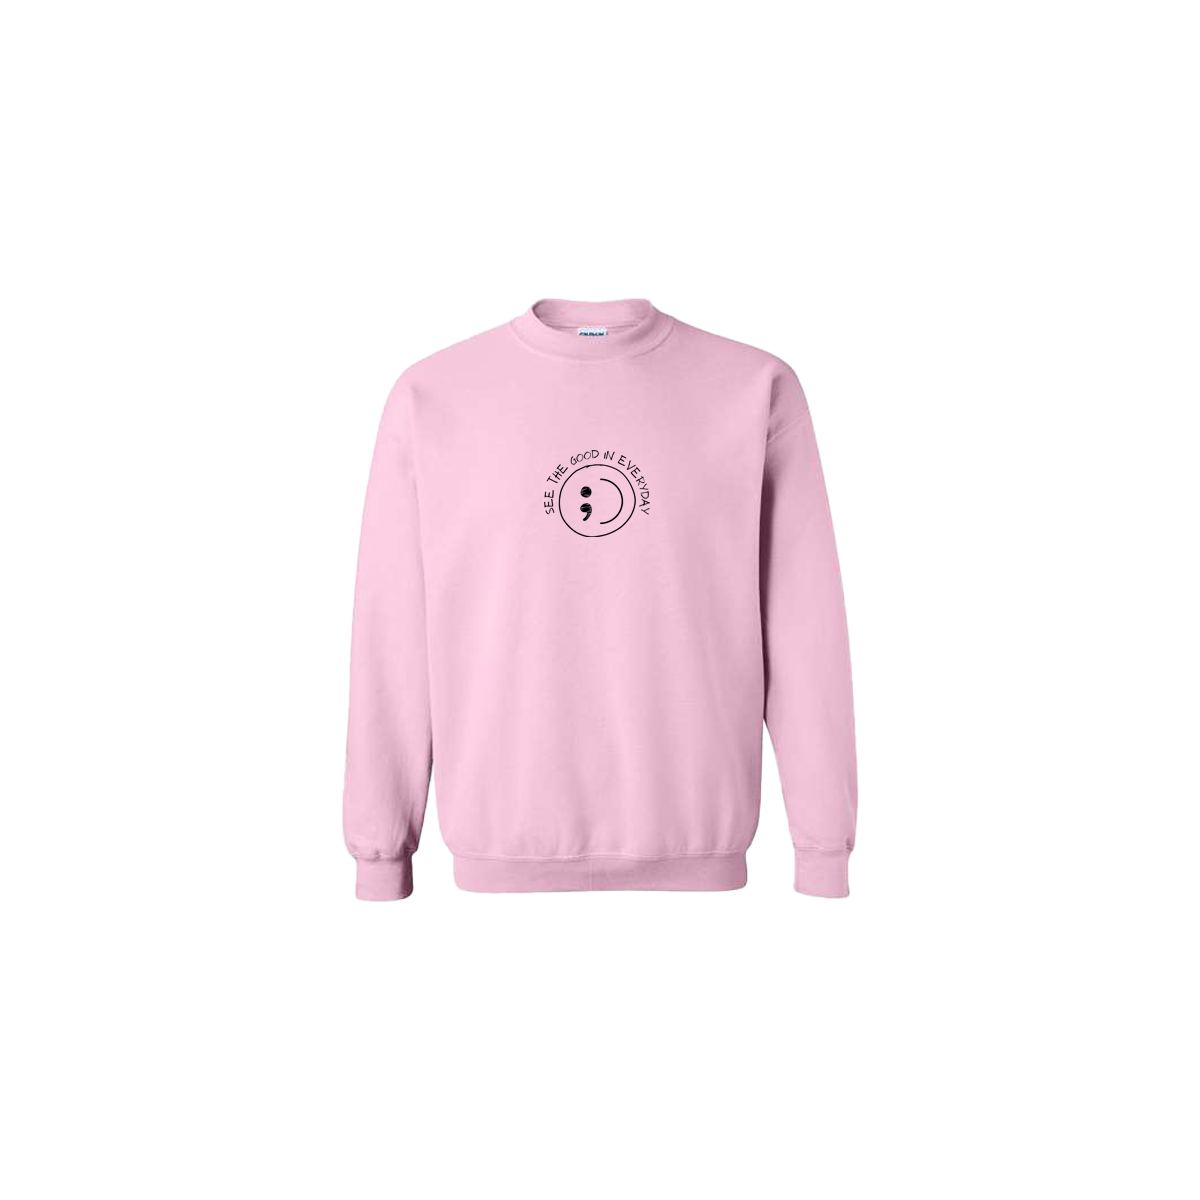 See the Good in Everyday Smiley Embroidered Light Pink Crewneck - Mental Health Awareness Clothing